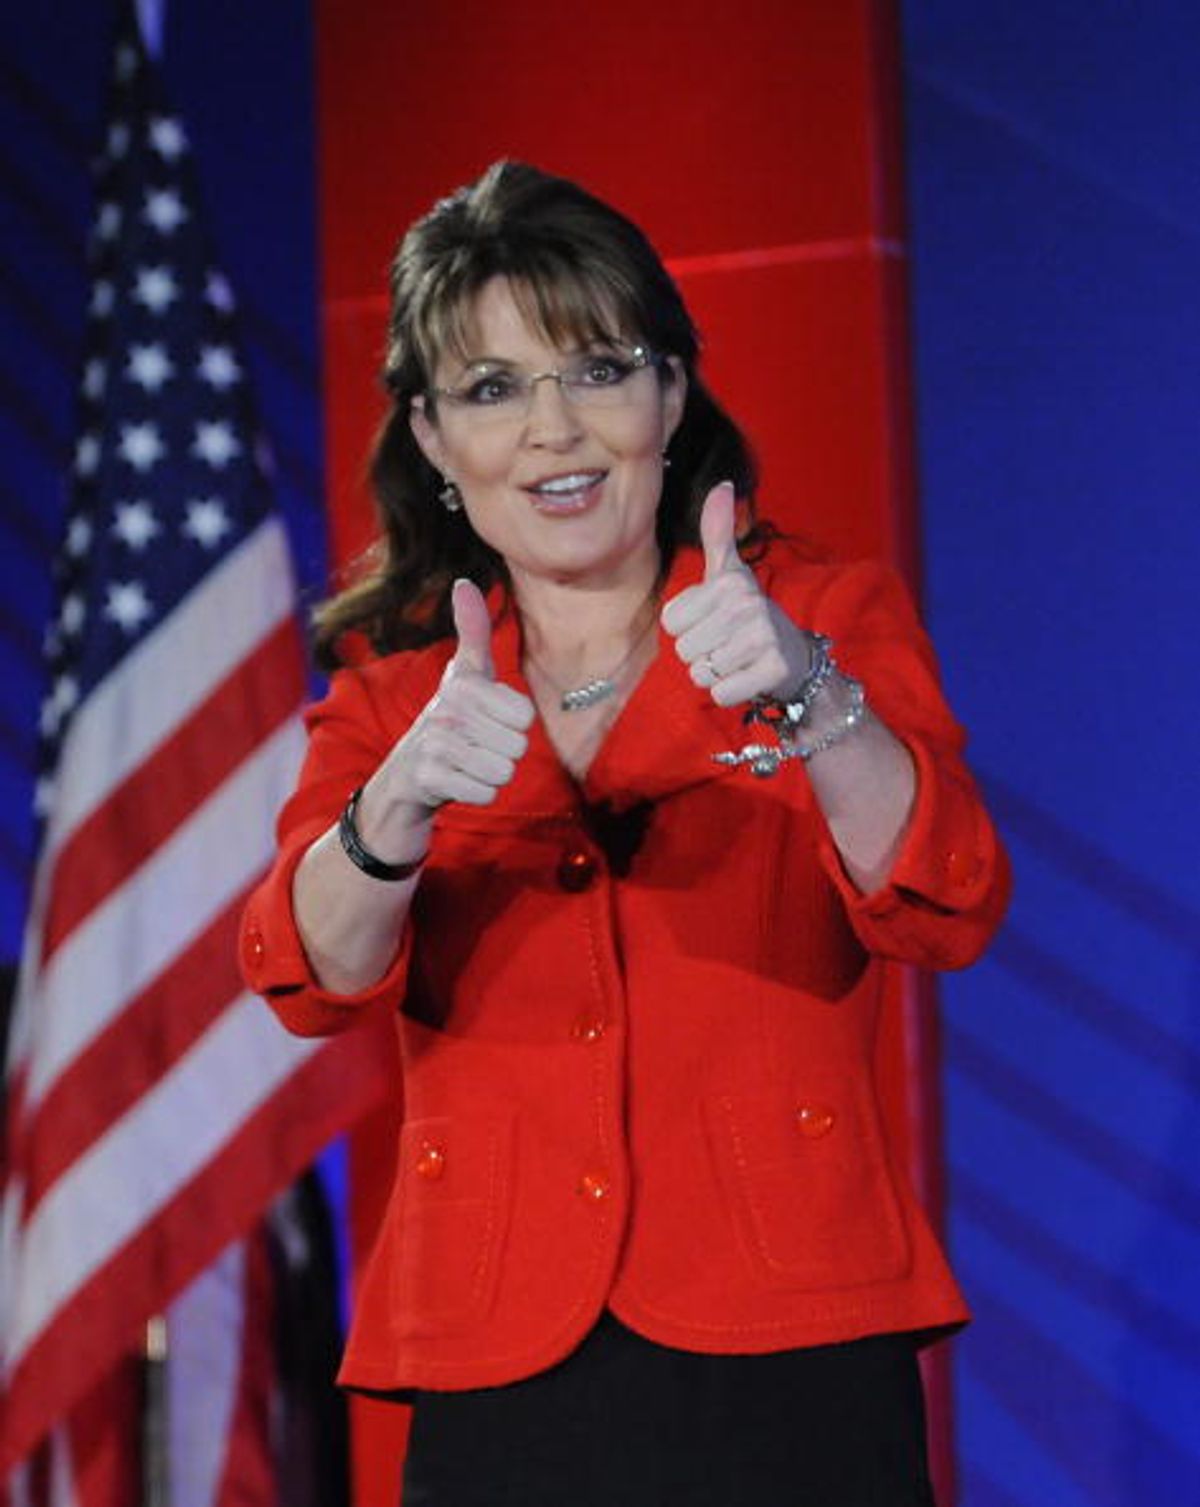 NEW ORLEANS, LA - APRIL 9:  (ALTERNATE CROP) Former Alaska Governor Sarah Palin gives two thumbs up to the audience at the Southern Republican Leadership Conference, April 9, 2010 in New Orleans, Louisiana. Many of the Republican Party's most prominent members will be speaking at the conference which runs from April 8-11. (Photo by Cheryl Gerber/Getty Images)  (Getty Images)